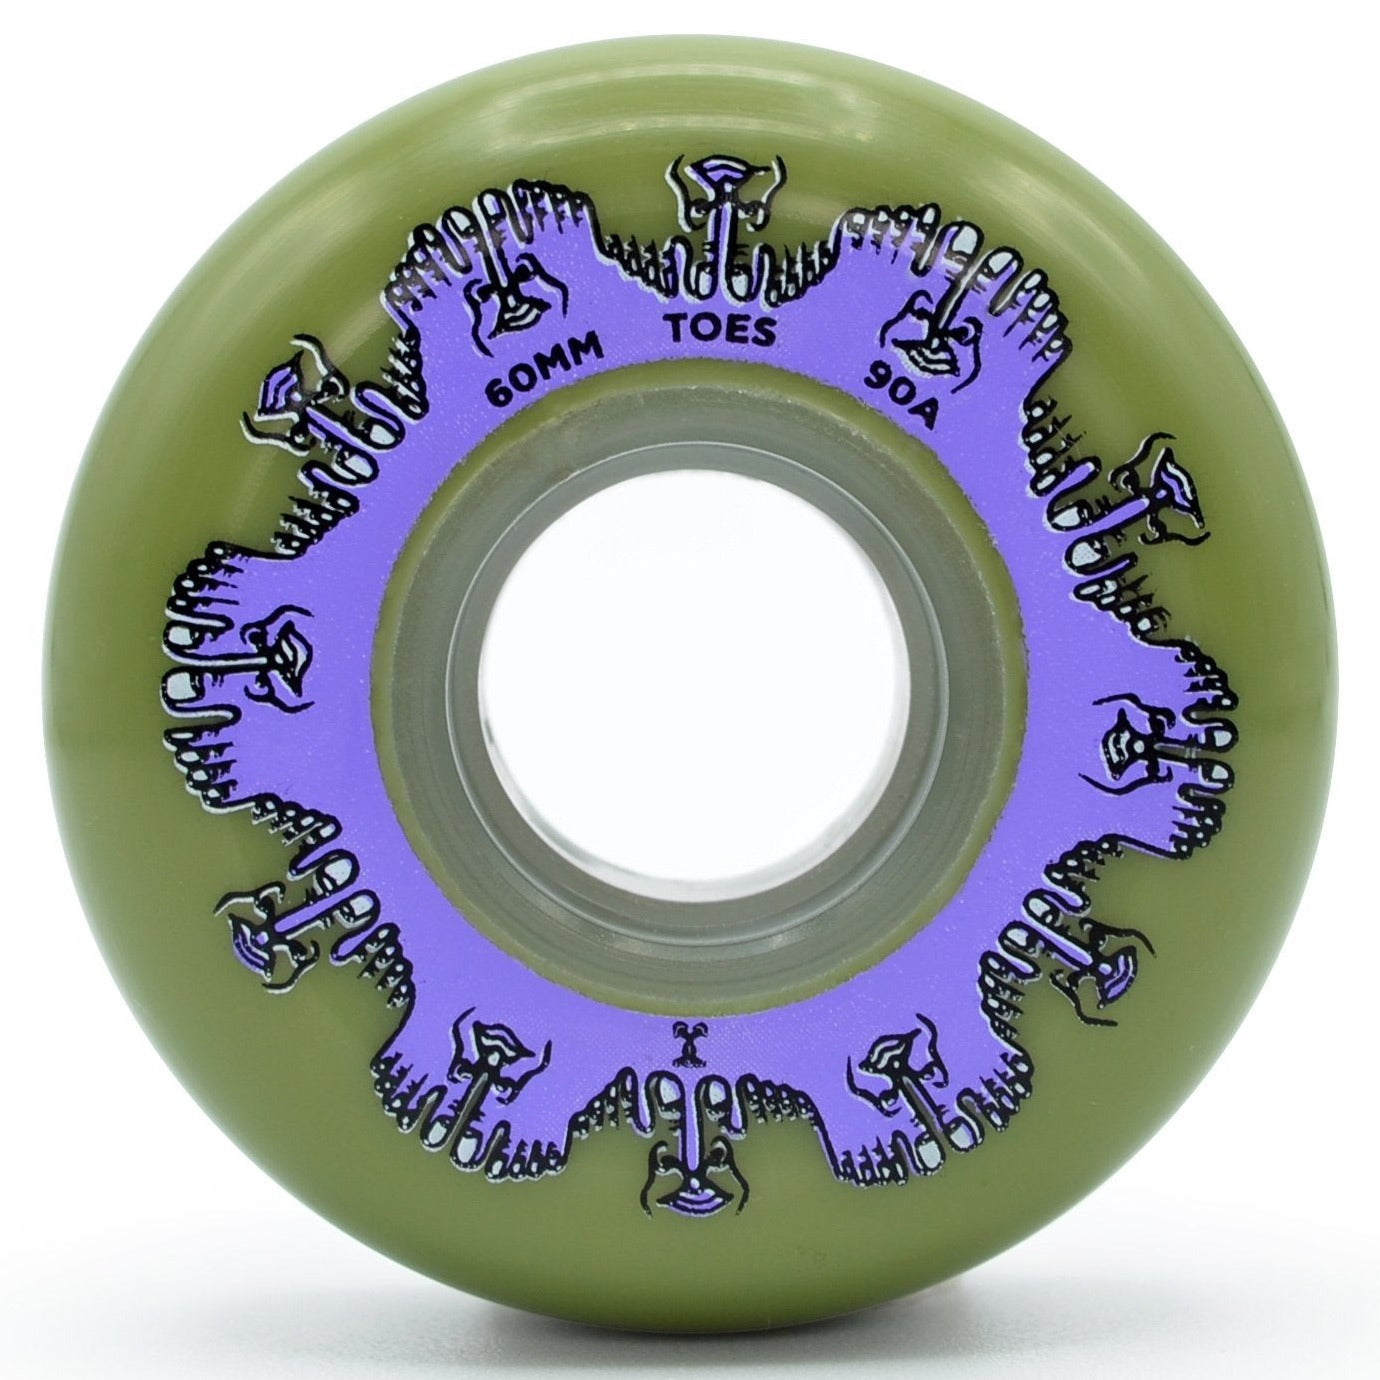 60mm 90a Toes Wheels